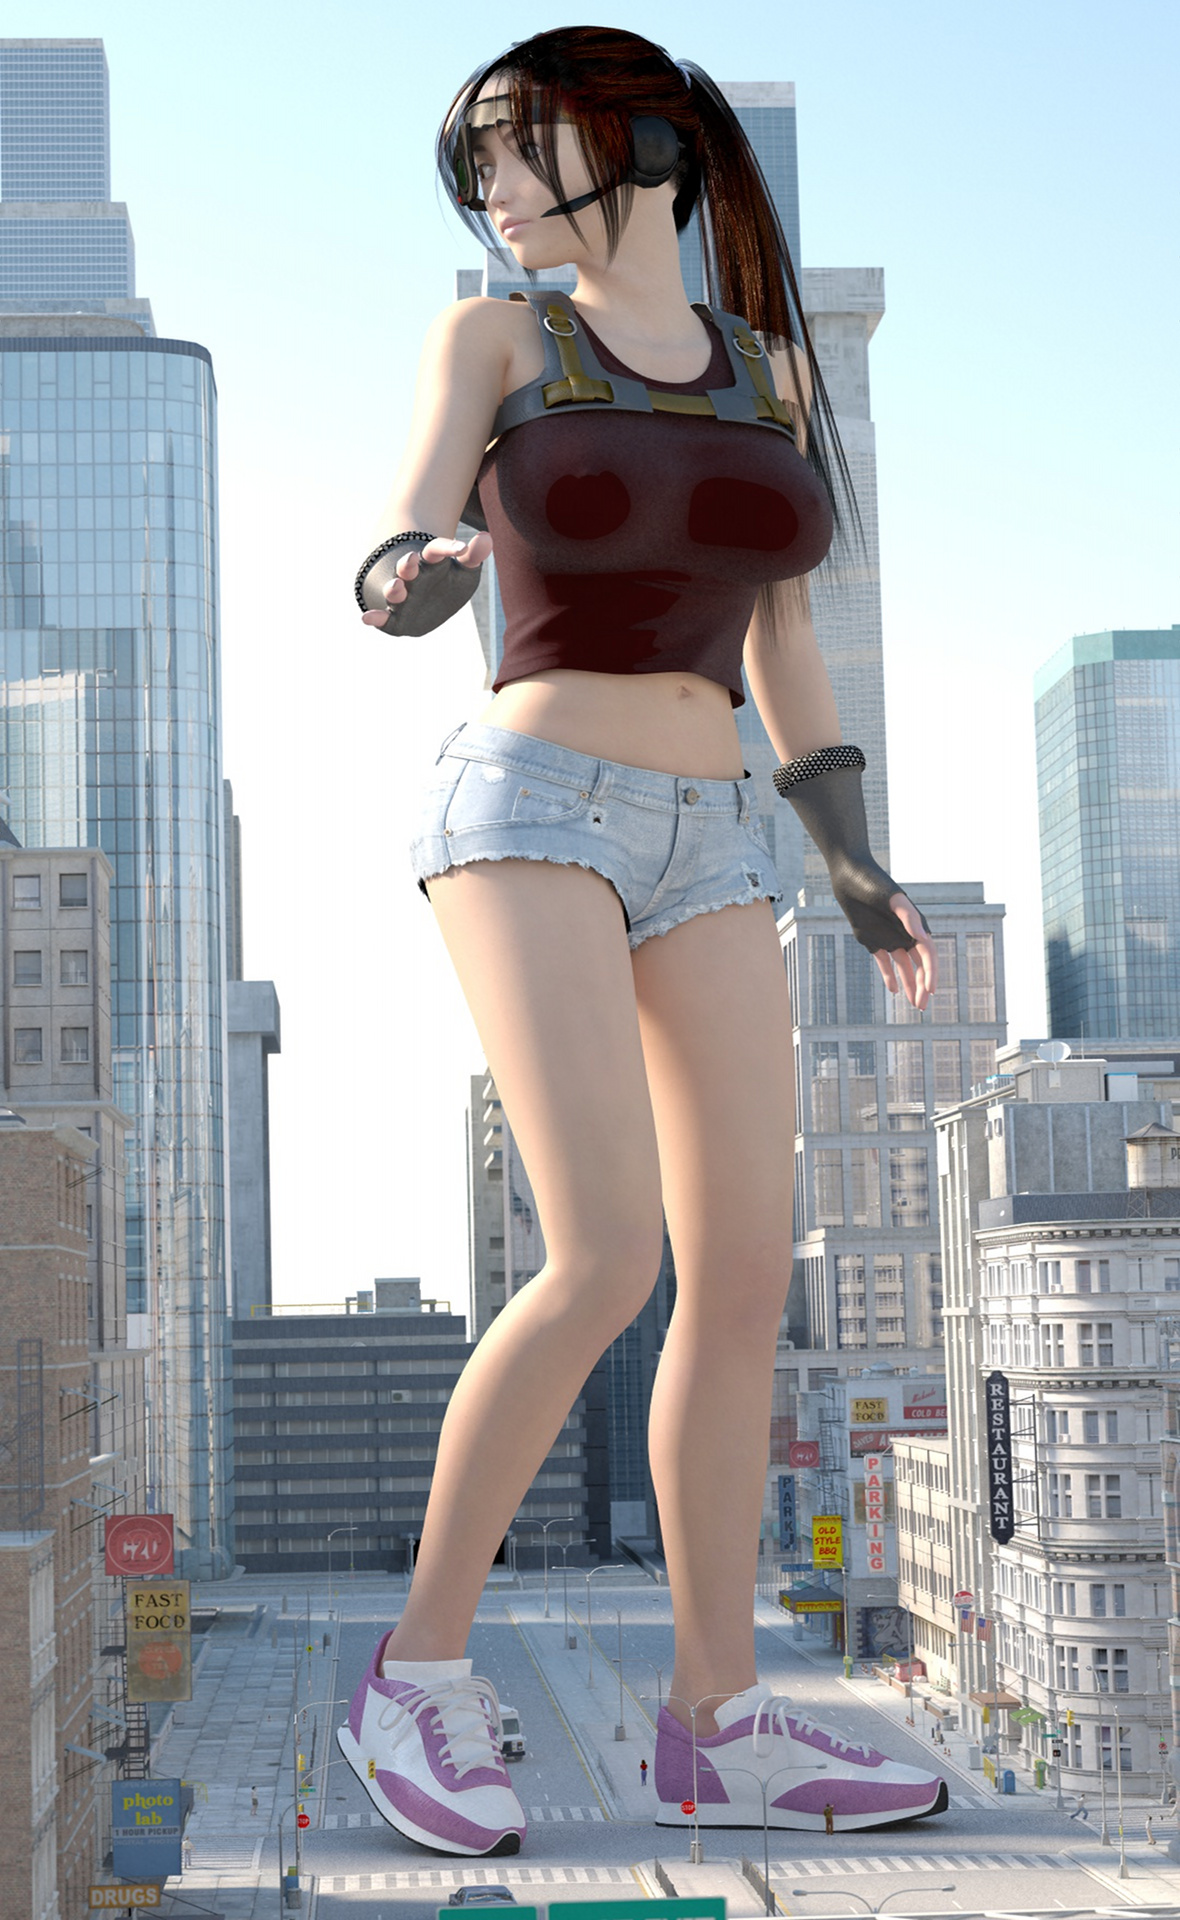 Permalink to Video Thursday - One Piece Giantess Growth. 